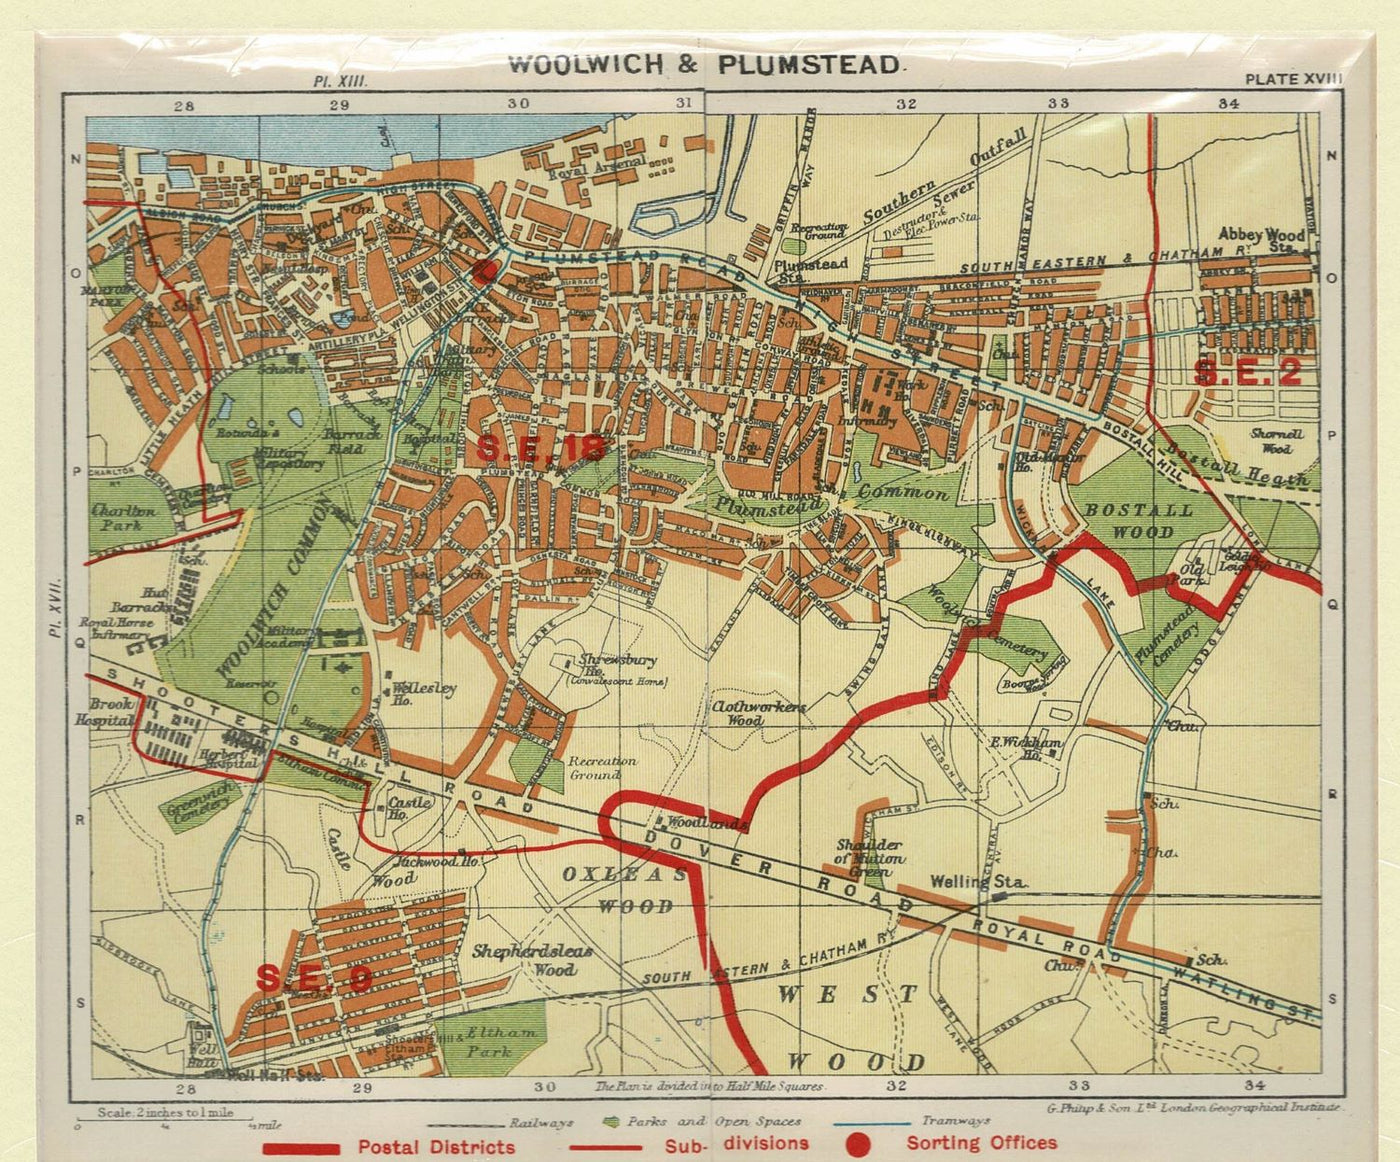 Woolwich and Plumstead, Antique Map, 1924